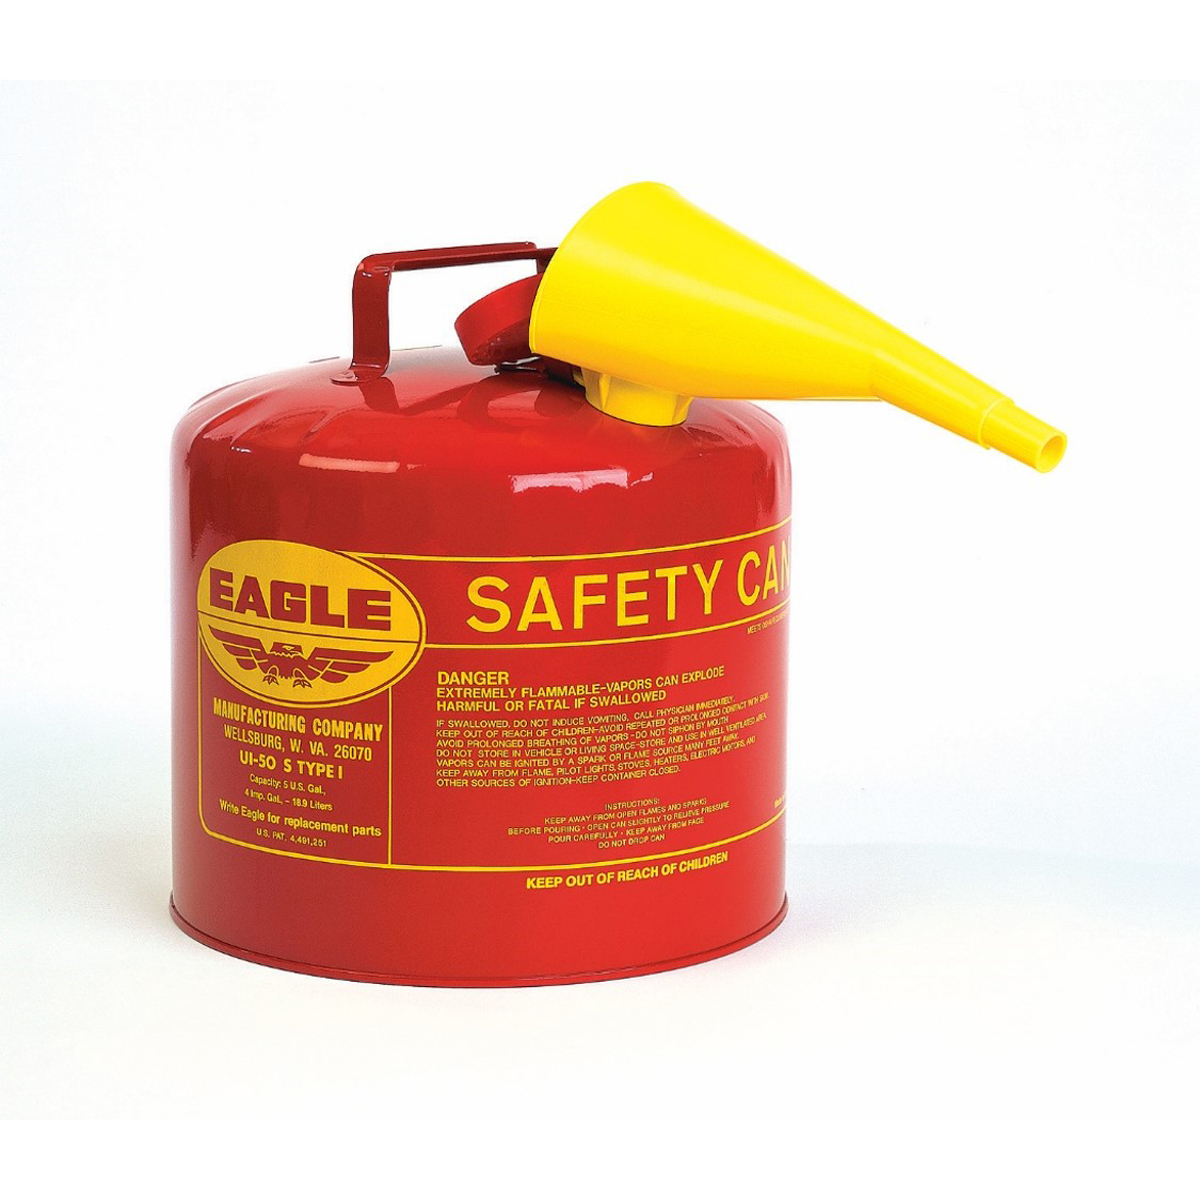 Eagle 5 Gallon Red 24 Gauge Galvanized Steel Type I Safety Can With Non-Sparking Flame Arrestor And F-15 Funnel